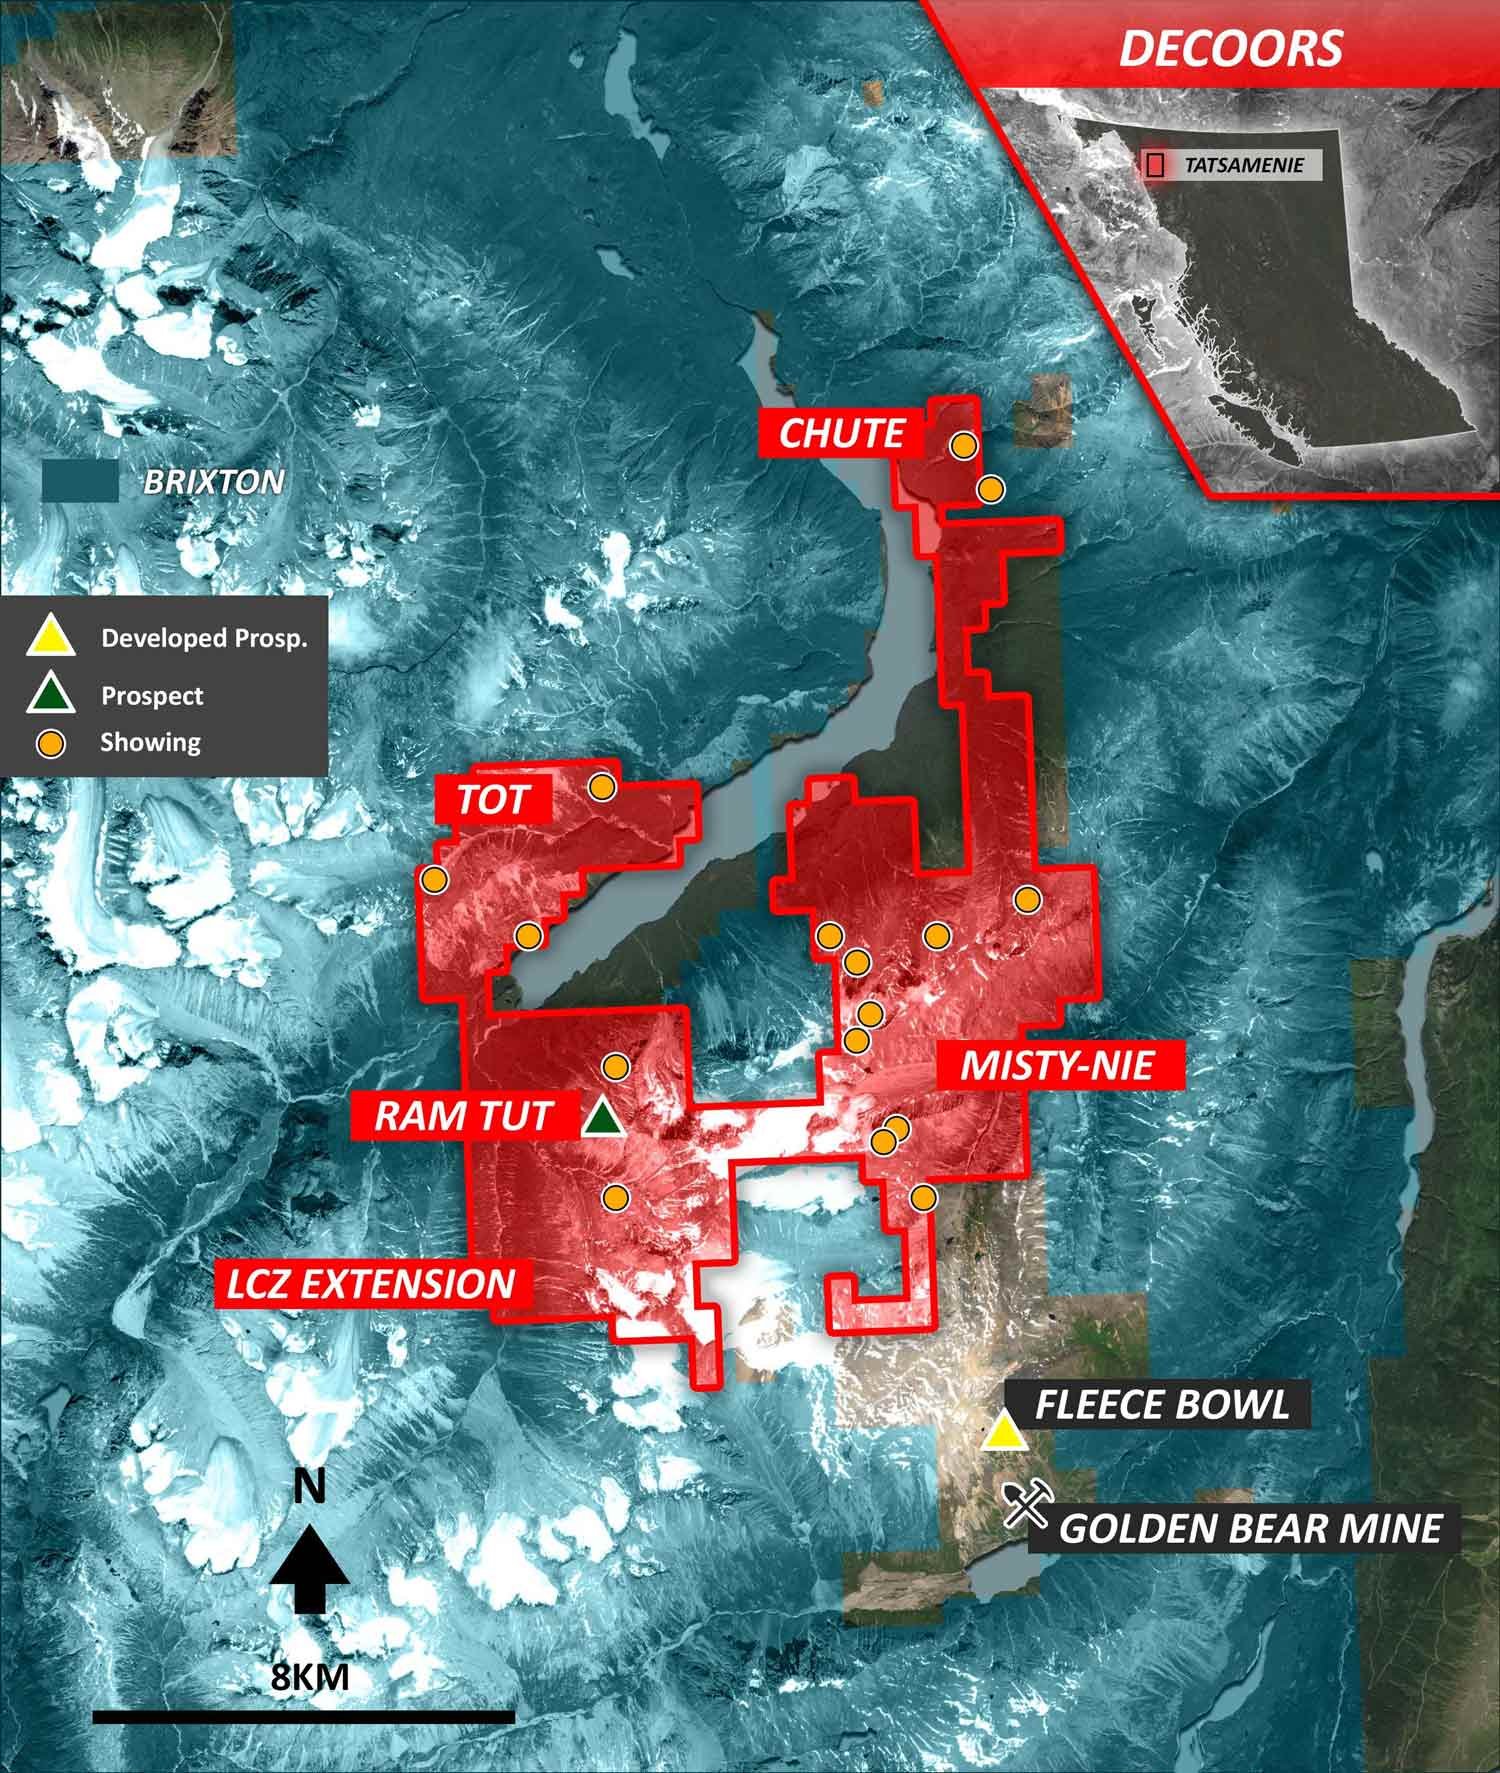 Map of Tatsamenie Property showing mineralized showings and claims overlaid on satellite imagery.